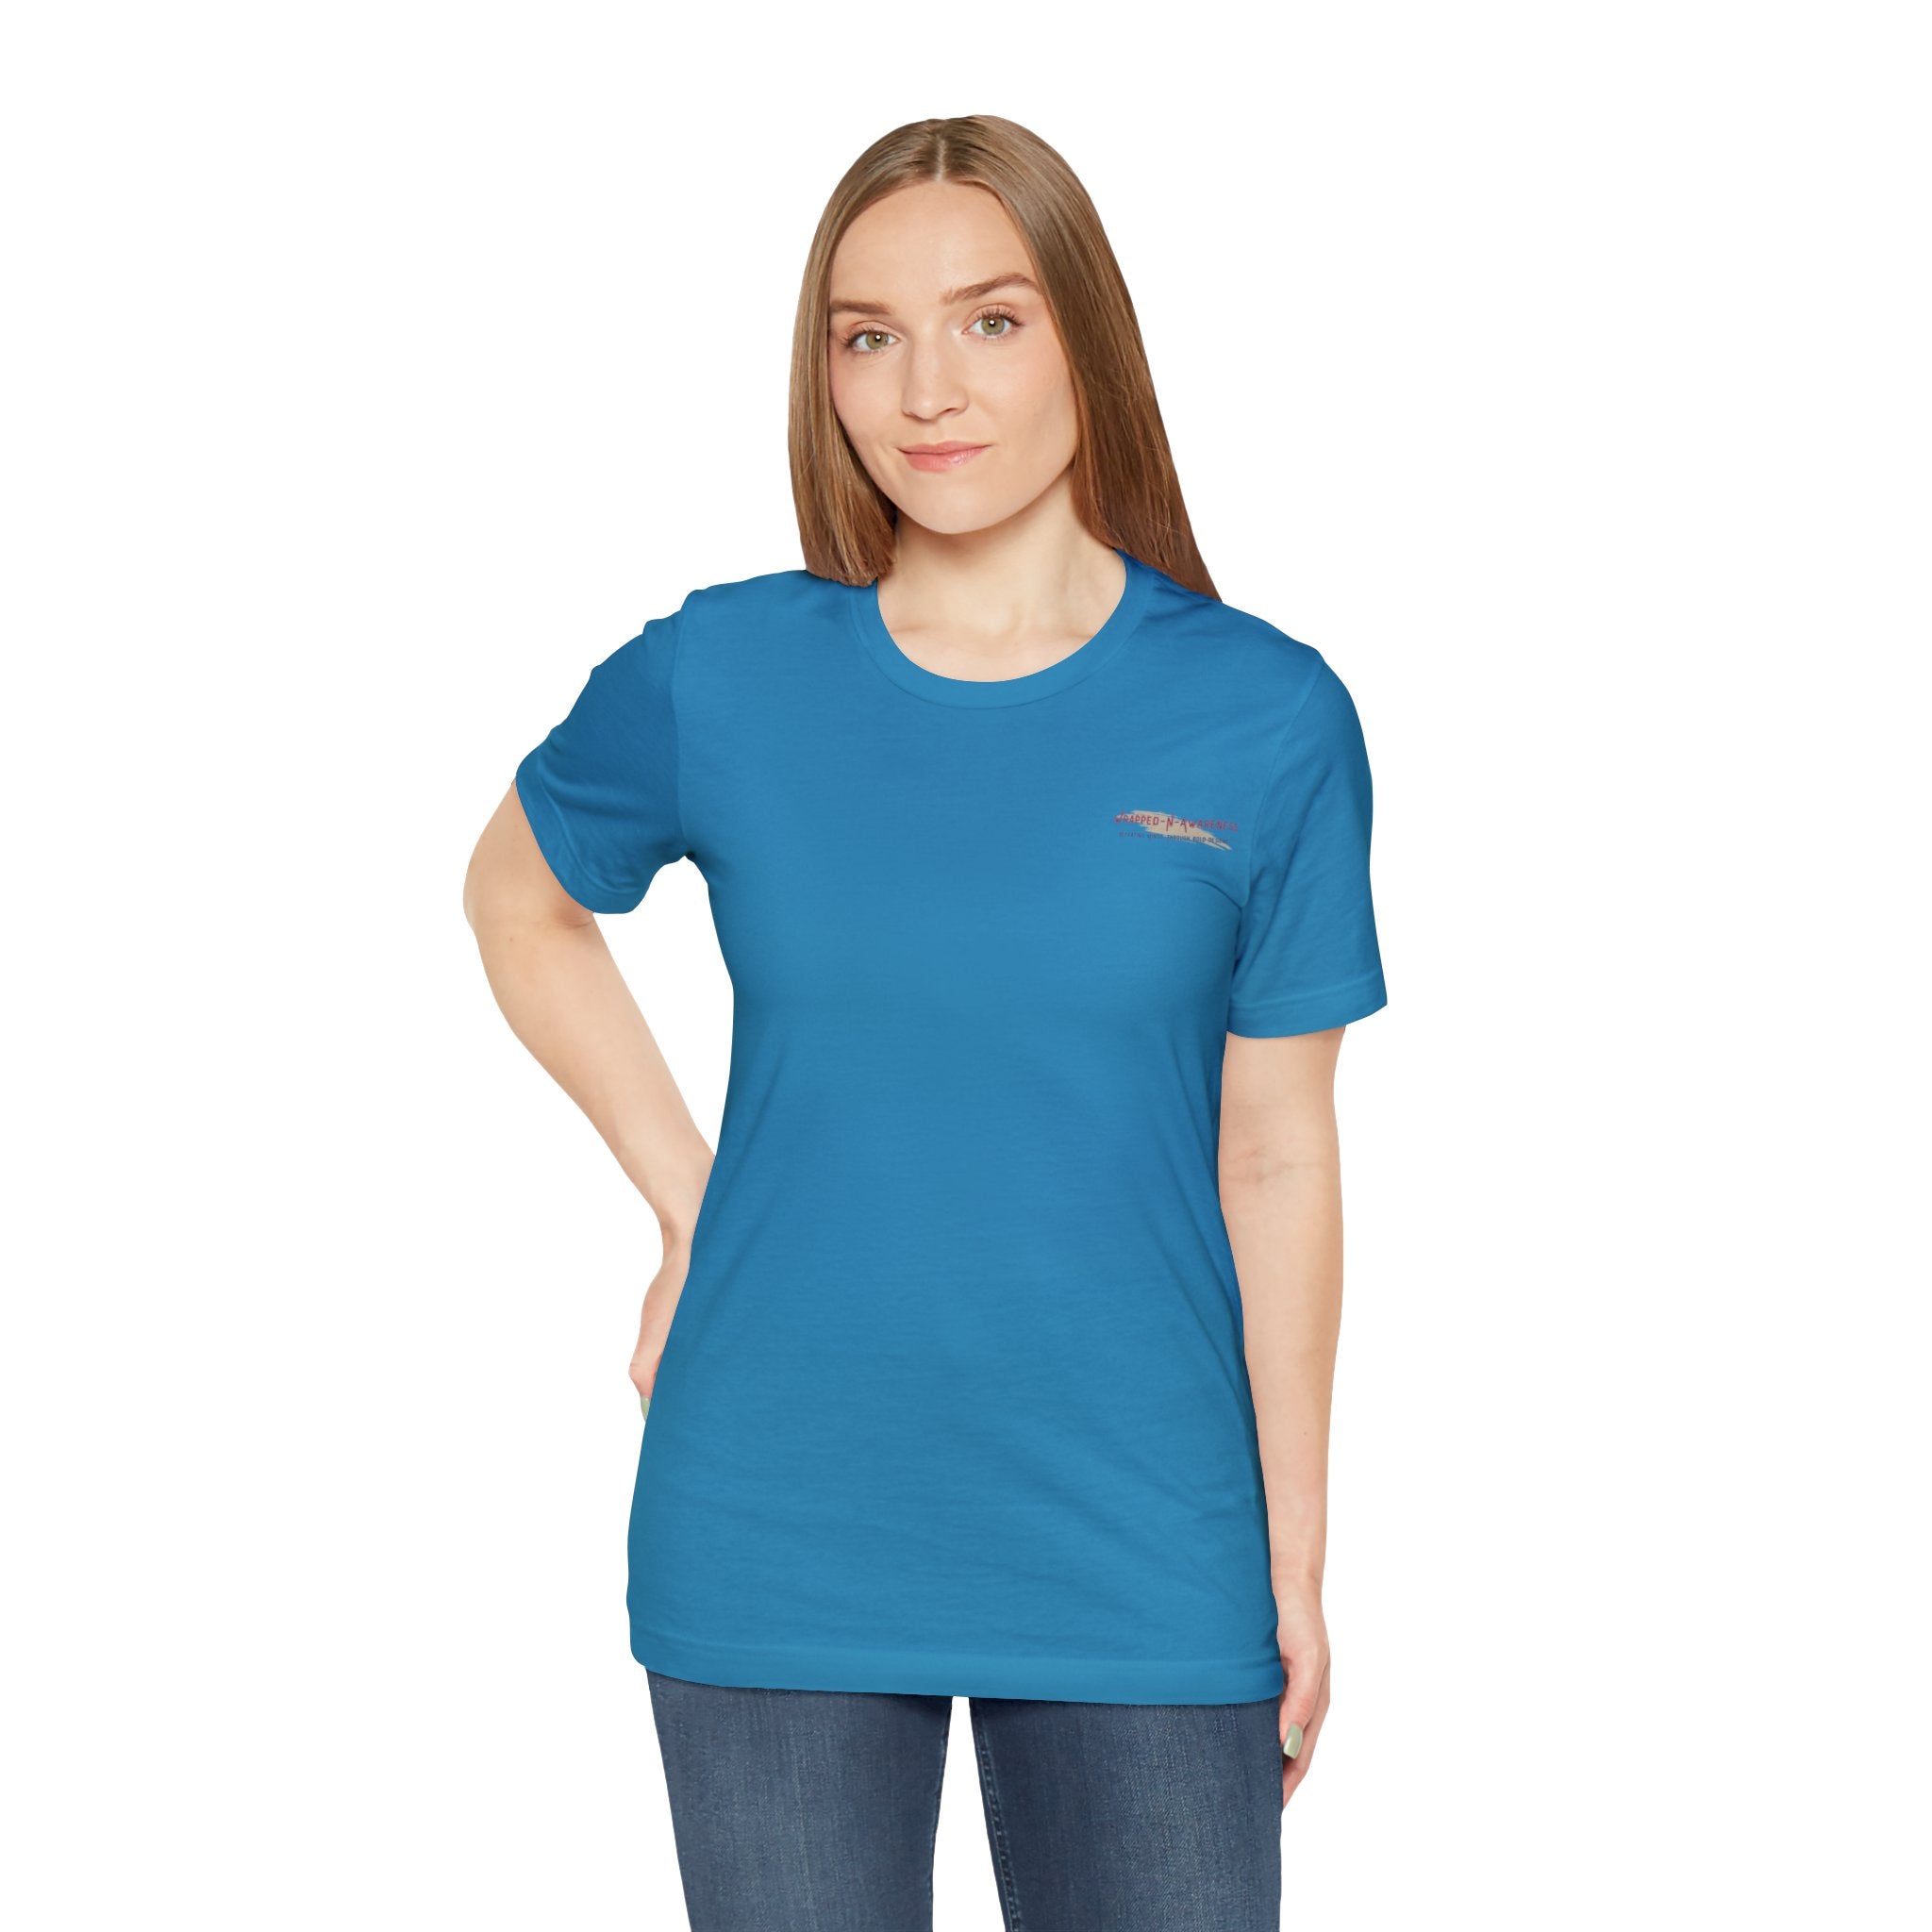 Release Your Mind Jersey Tee - Bella+Canvas 3001 Aqua Airlume Cotton Bella+Canvas 3001 Crew Neckline Jersey Short Sleeve Lightweight Fabric Mental Health Support Retail Fit Tear-away Label Tee Unisex Tee T-Shirt 13792937564263082994_2048 Printify